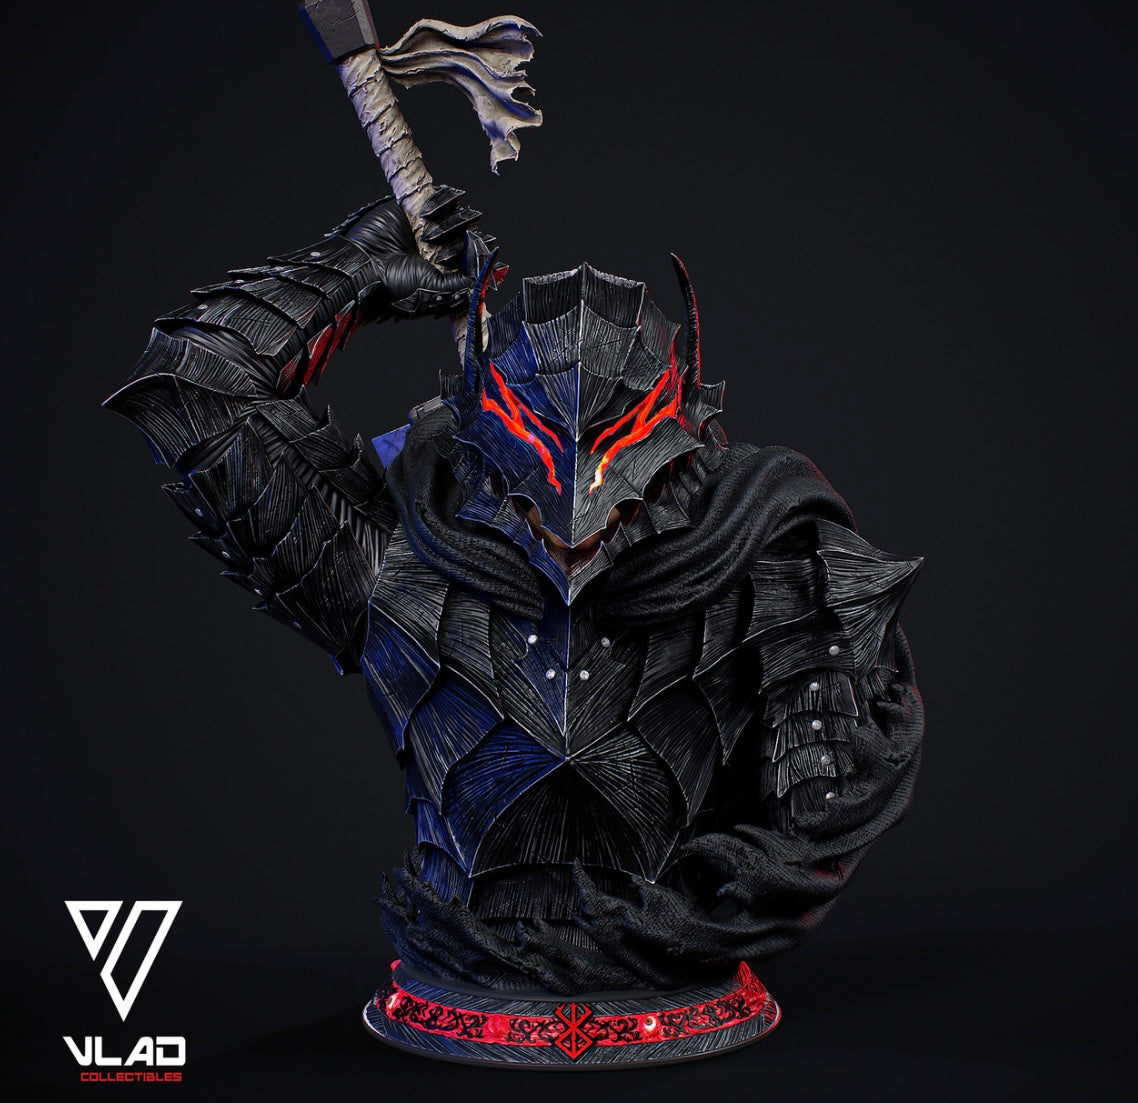 [PRE ORDER] Berserk - Vlad Collectibles - Guts 1/1 Bust (Price Does Not Include Shipping - Please Read Description)